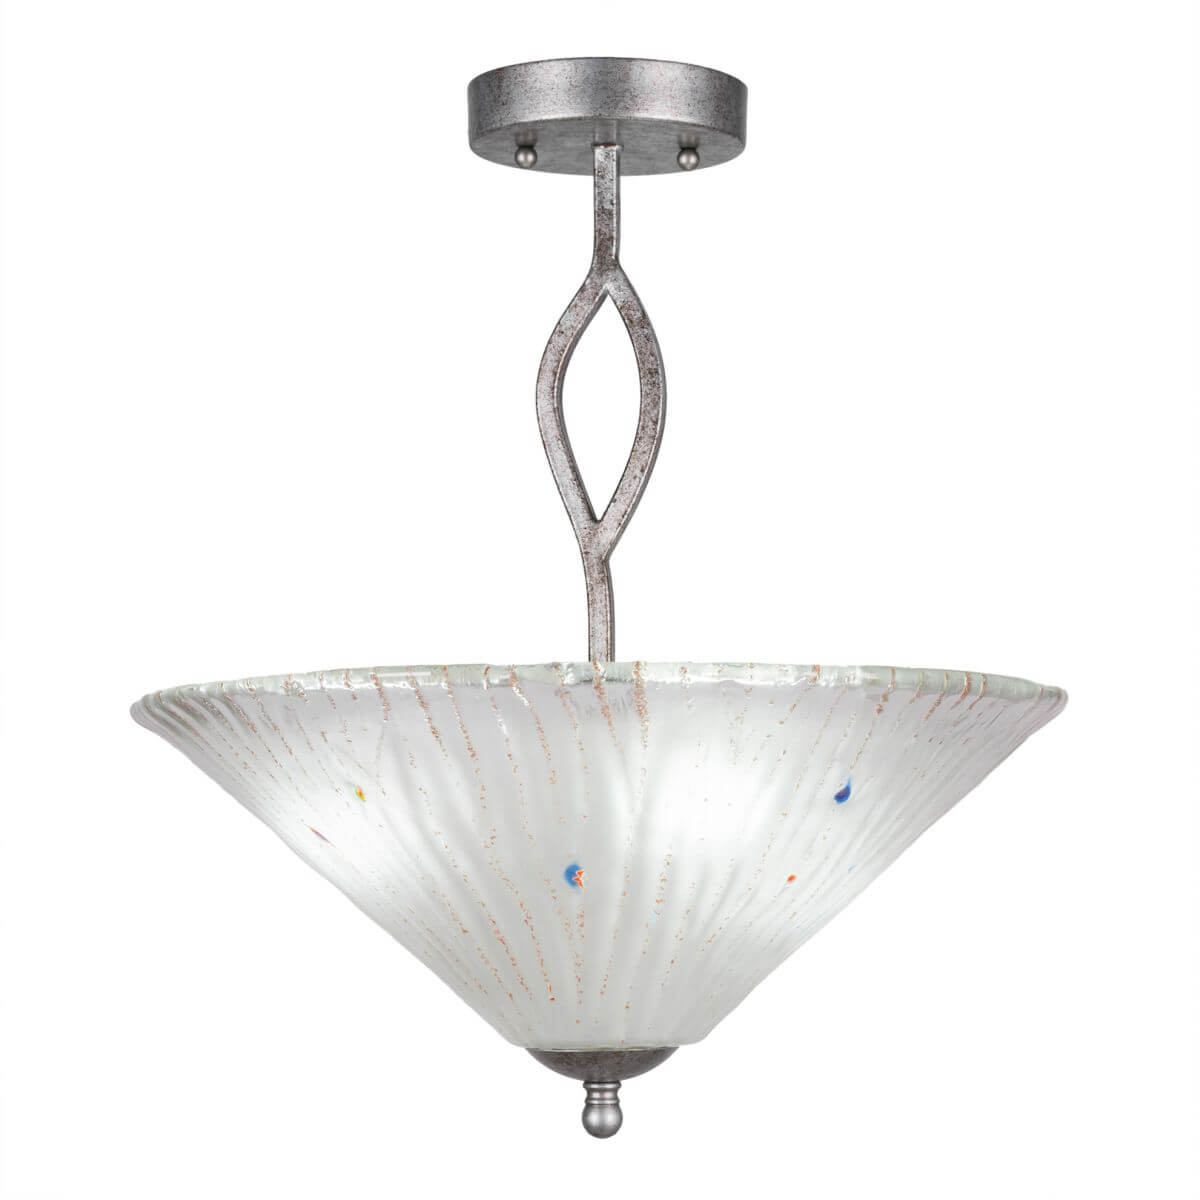 Toltec Lighting 242-AS-711 Revo 3 Light 16 inch Semi-Flush Mount in Aged Silver with 16 inch Frosted Crystal Glass